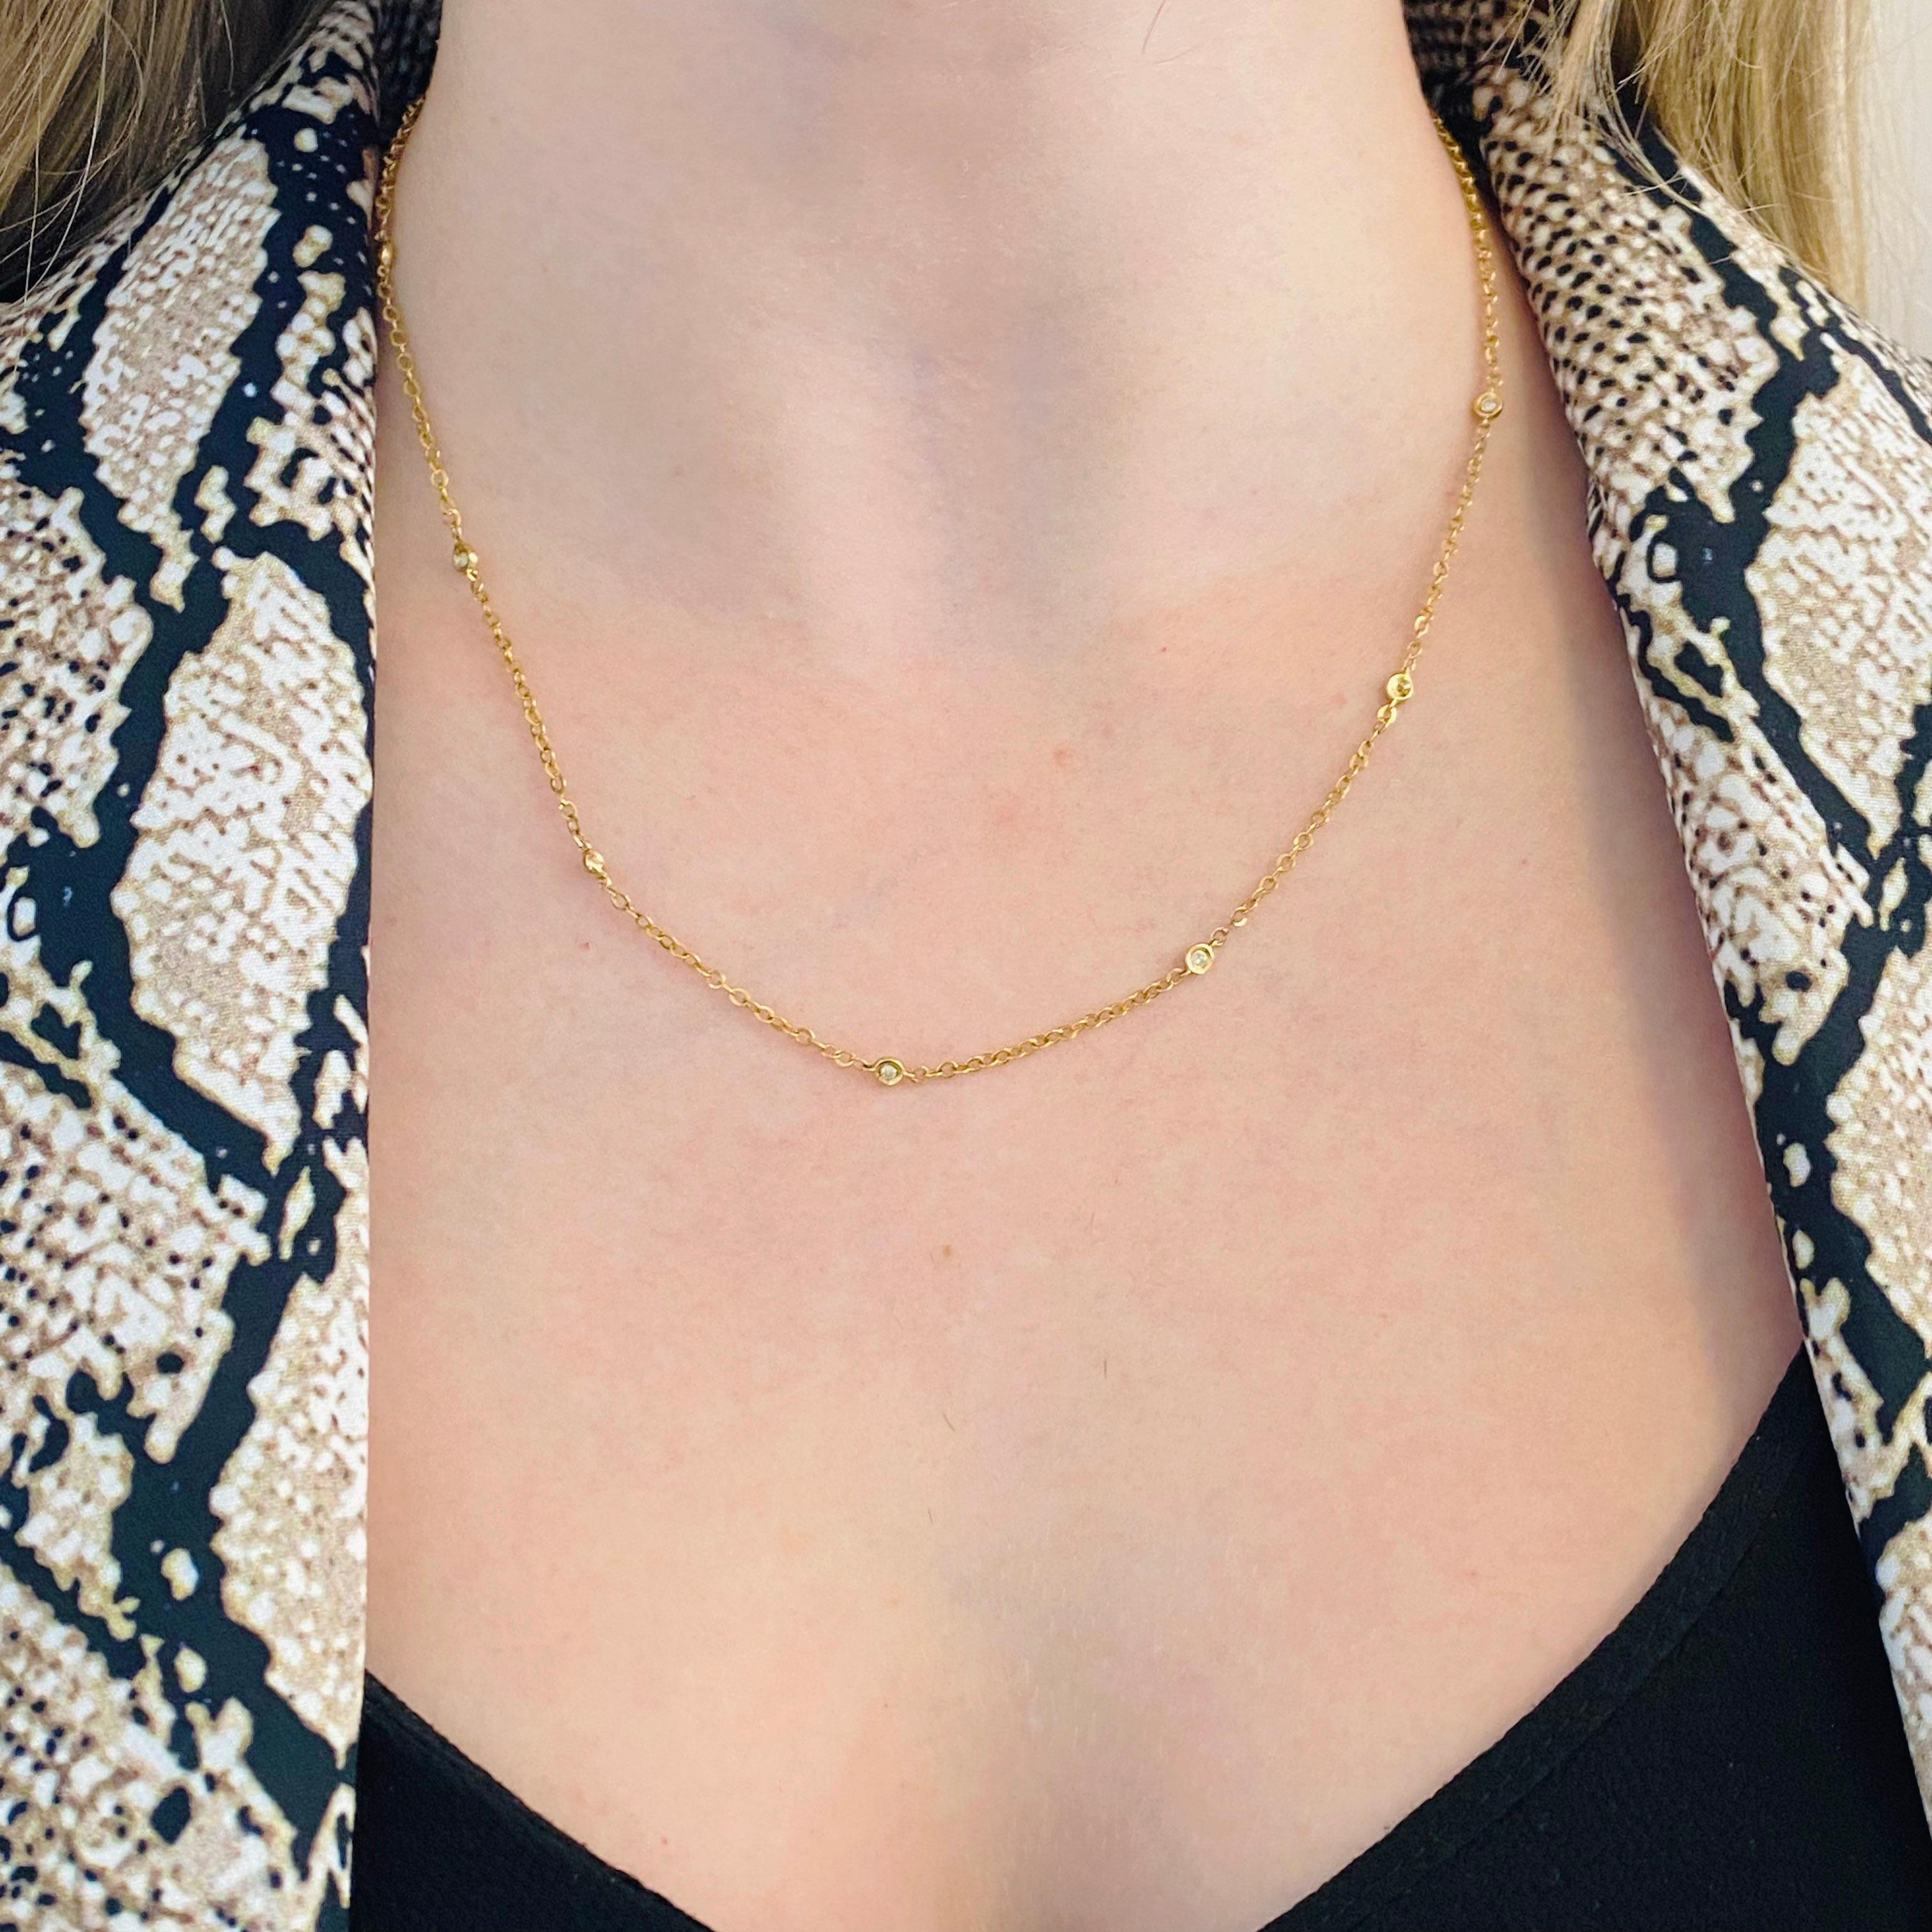 This diamond by the yard necklace has seven gorgeous diamonds. The diamonds are set in gold bezels and evenly spaced on the front of the necklace. This is a perfect necklace for layering.
Metal Quality: 14kt yellow gold
Chain Type: diamond by the